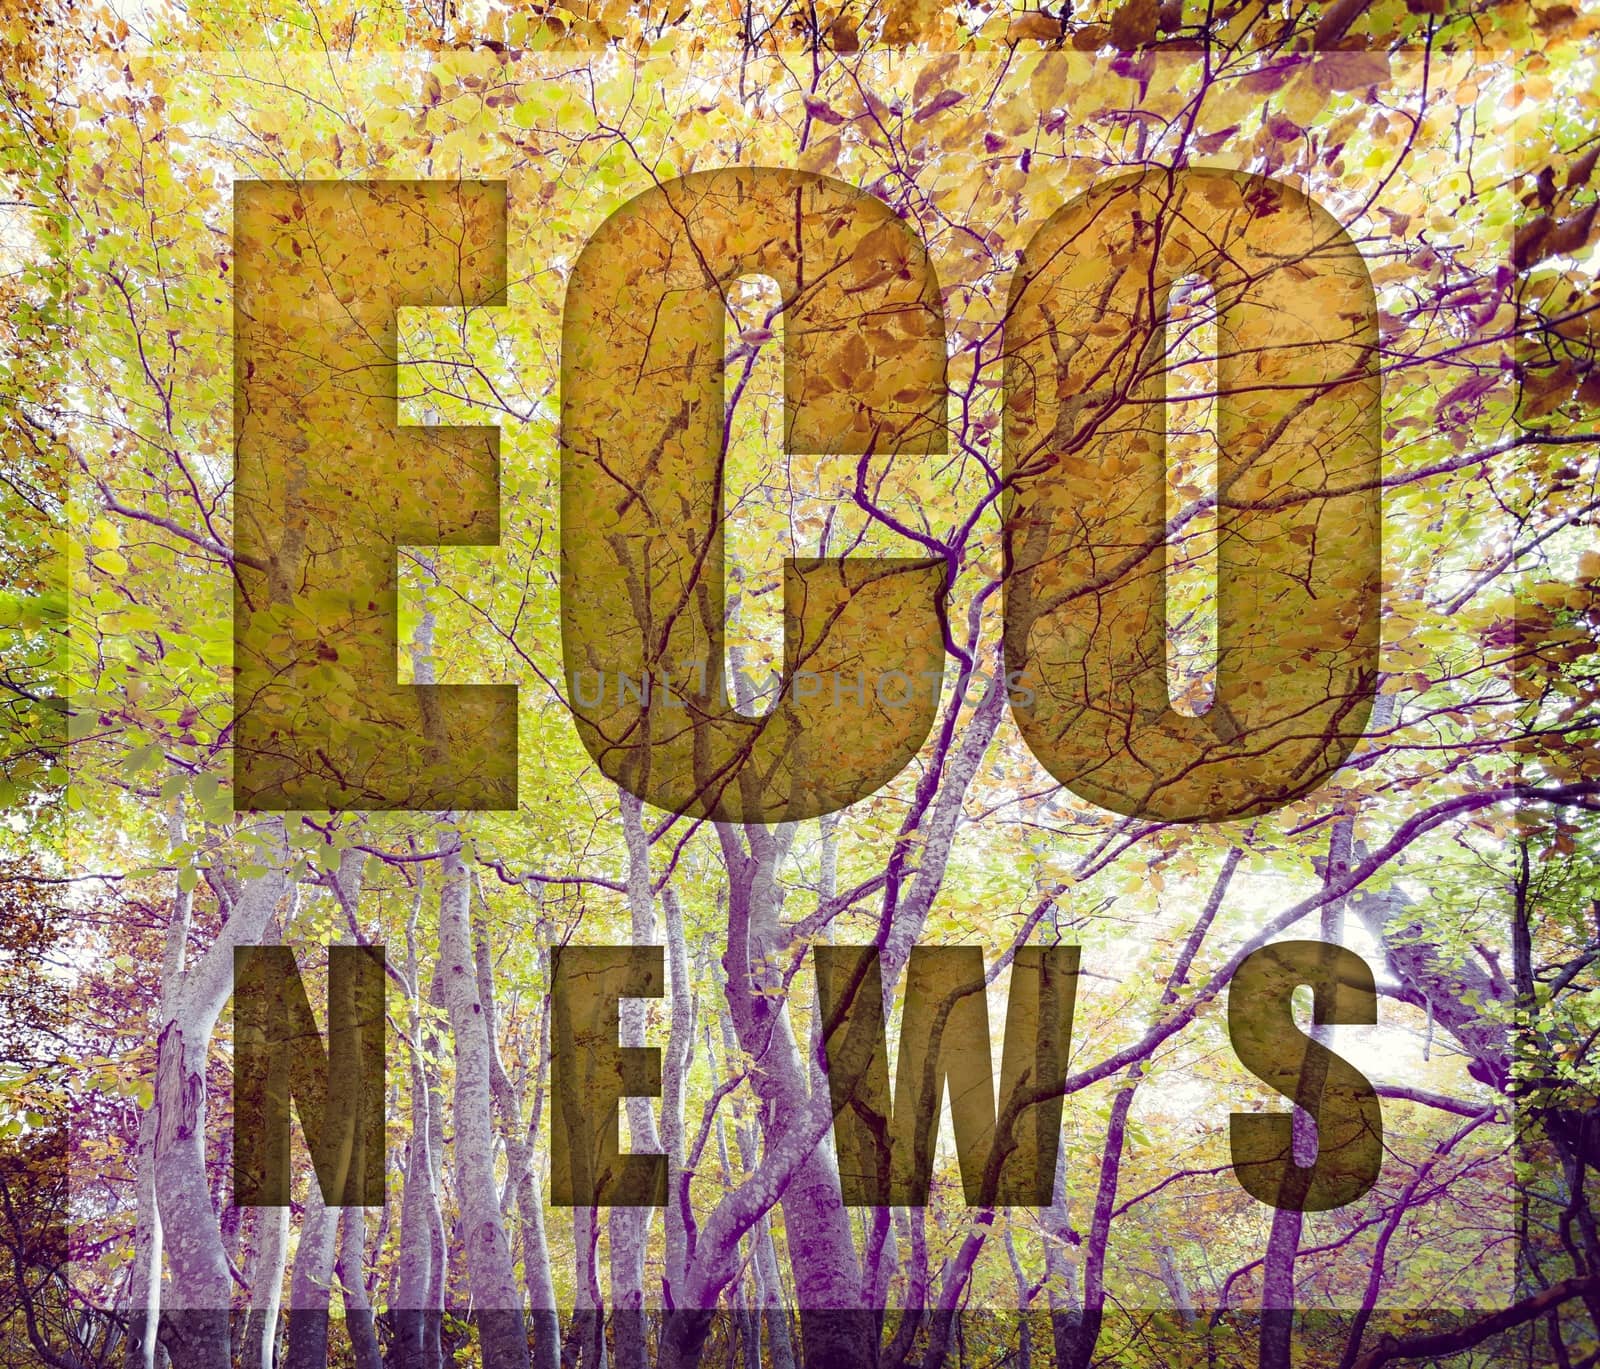 Picture of a wood with the title "Eco News"